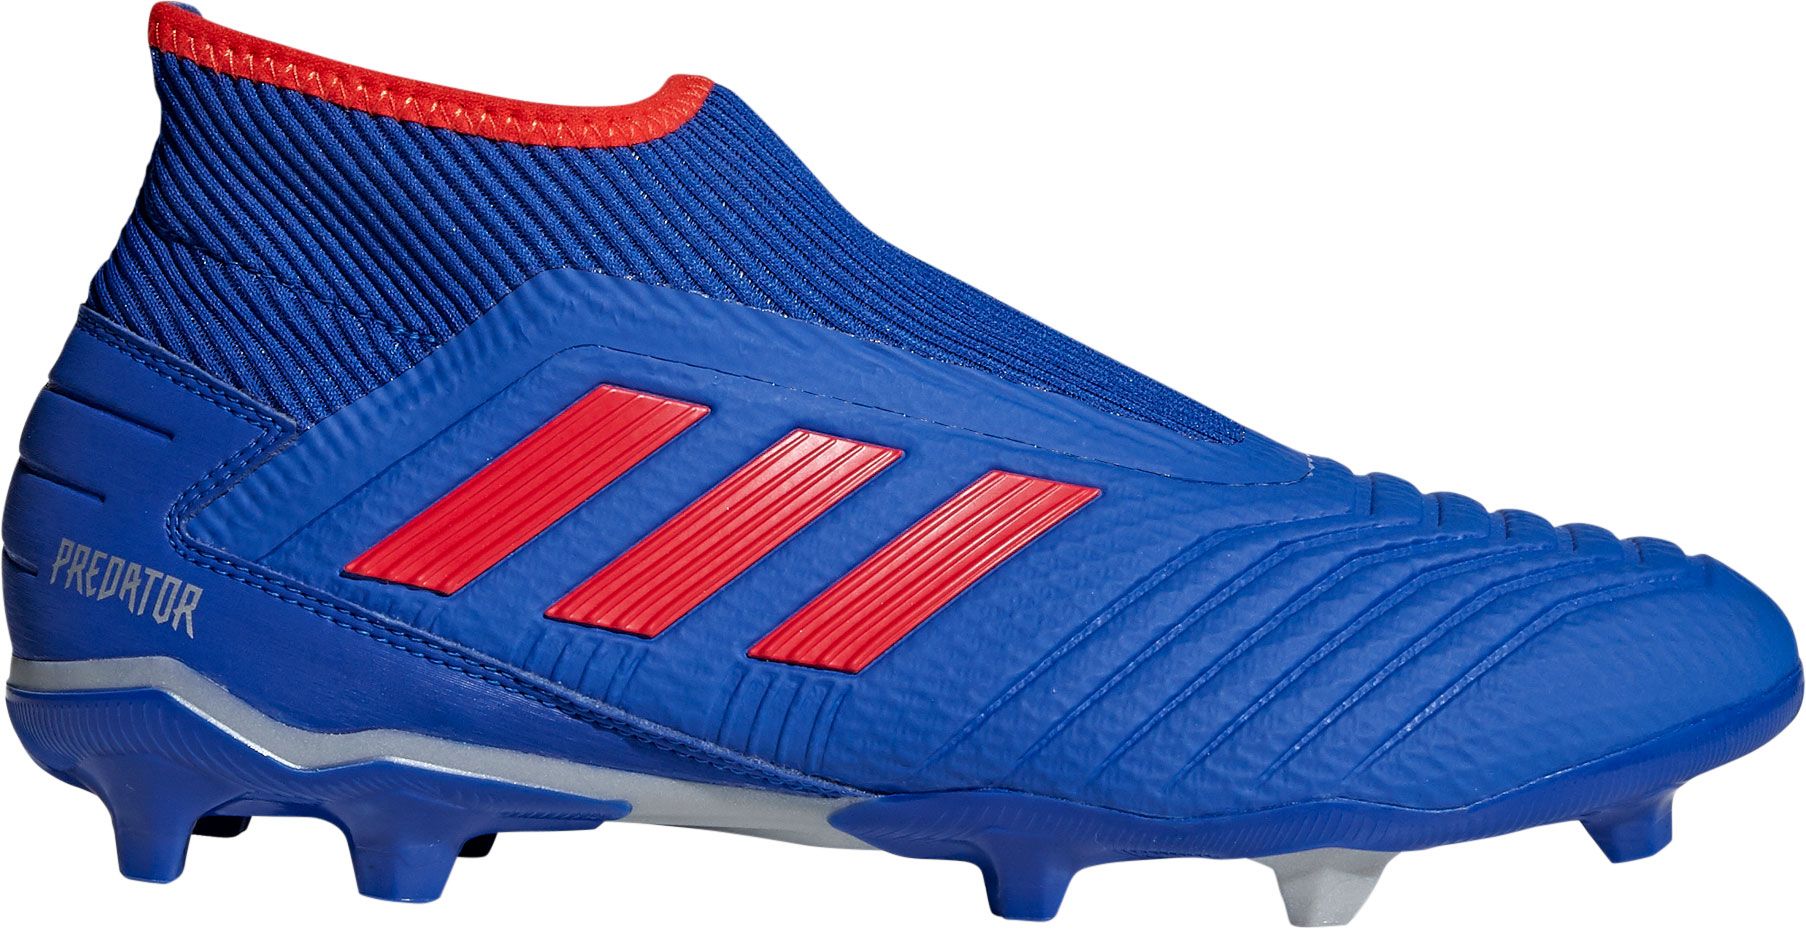 mens laceless soccer cleats